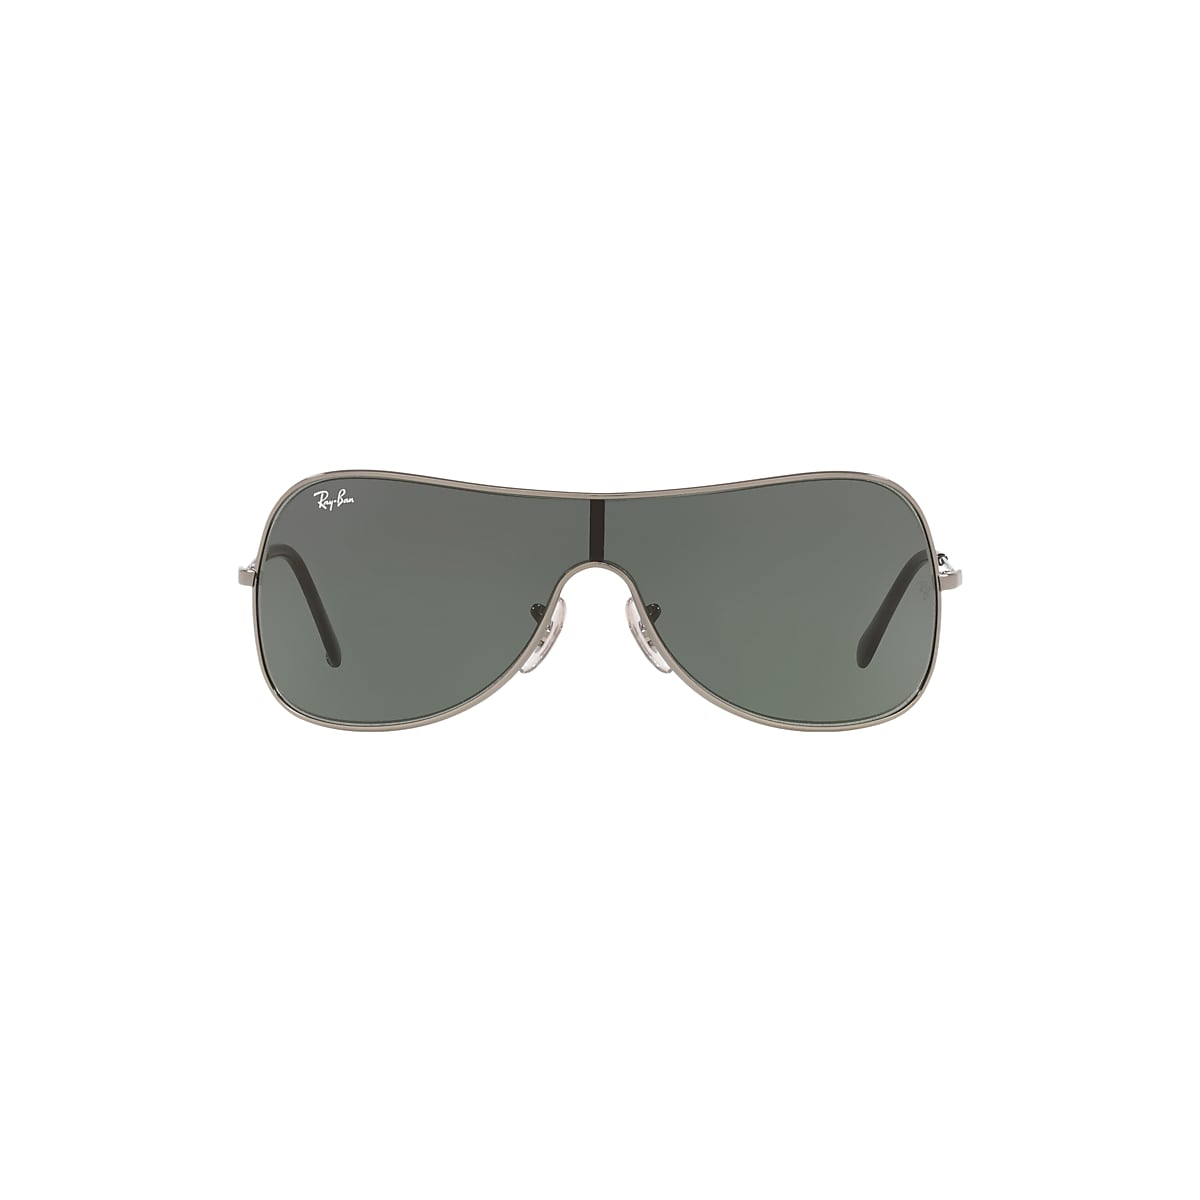 Rb3211 Sunglasses in Gunmetal and Green | Ray-Ban®